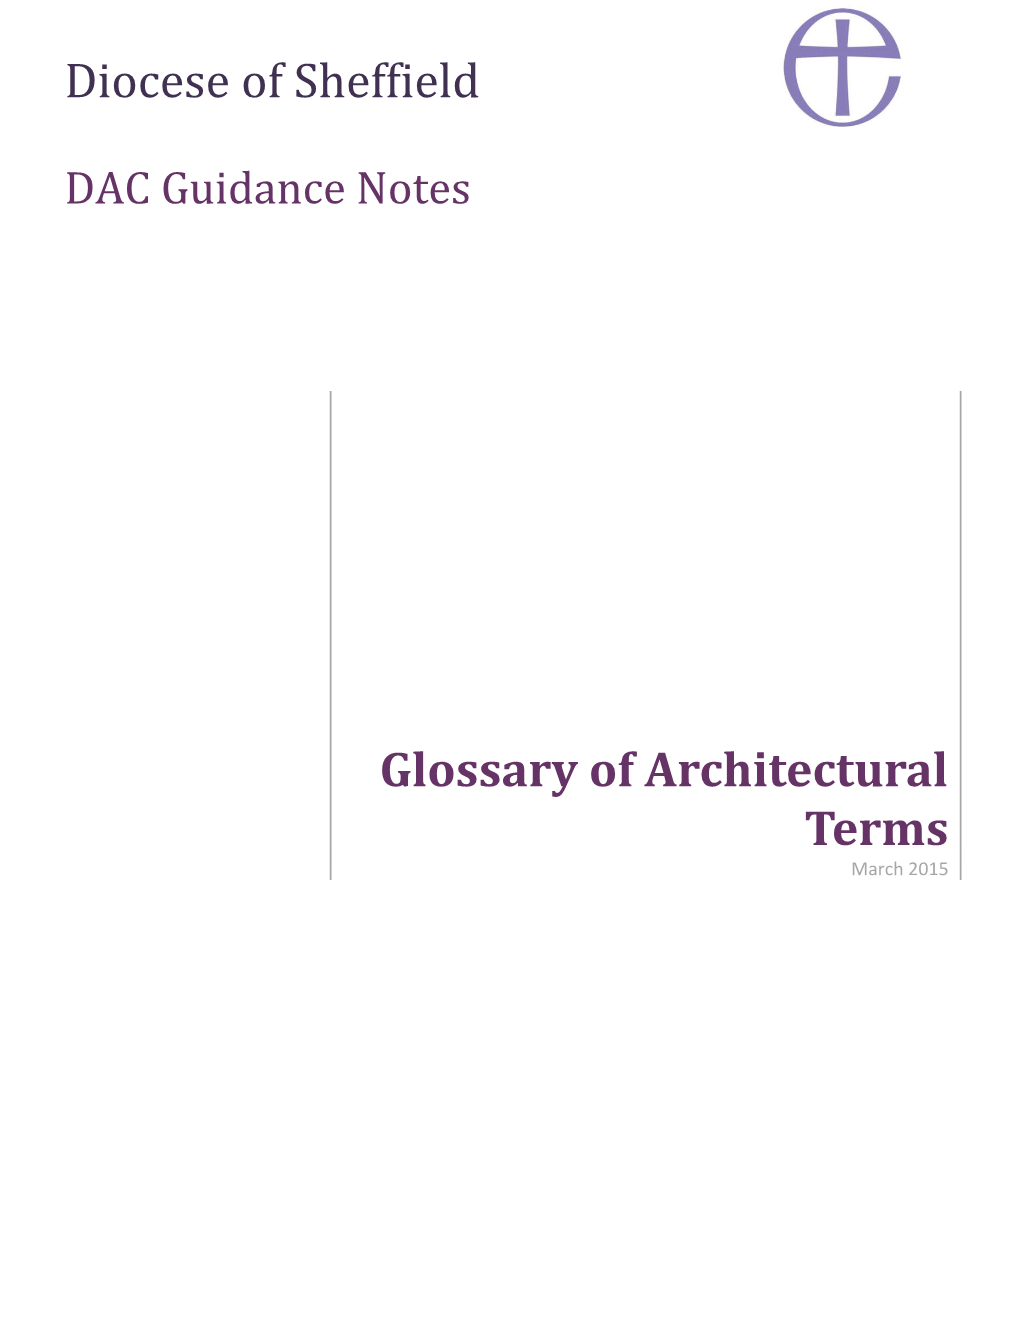 Glossary of Architectural and Technical Terms